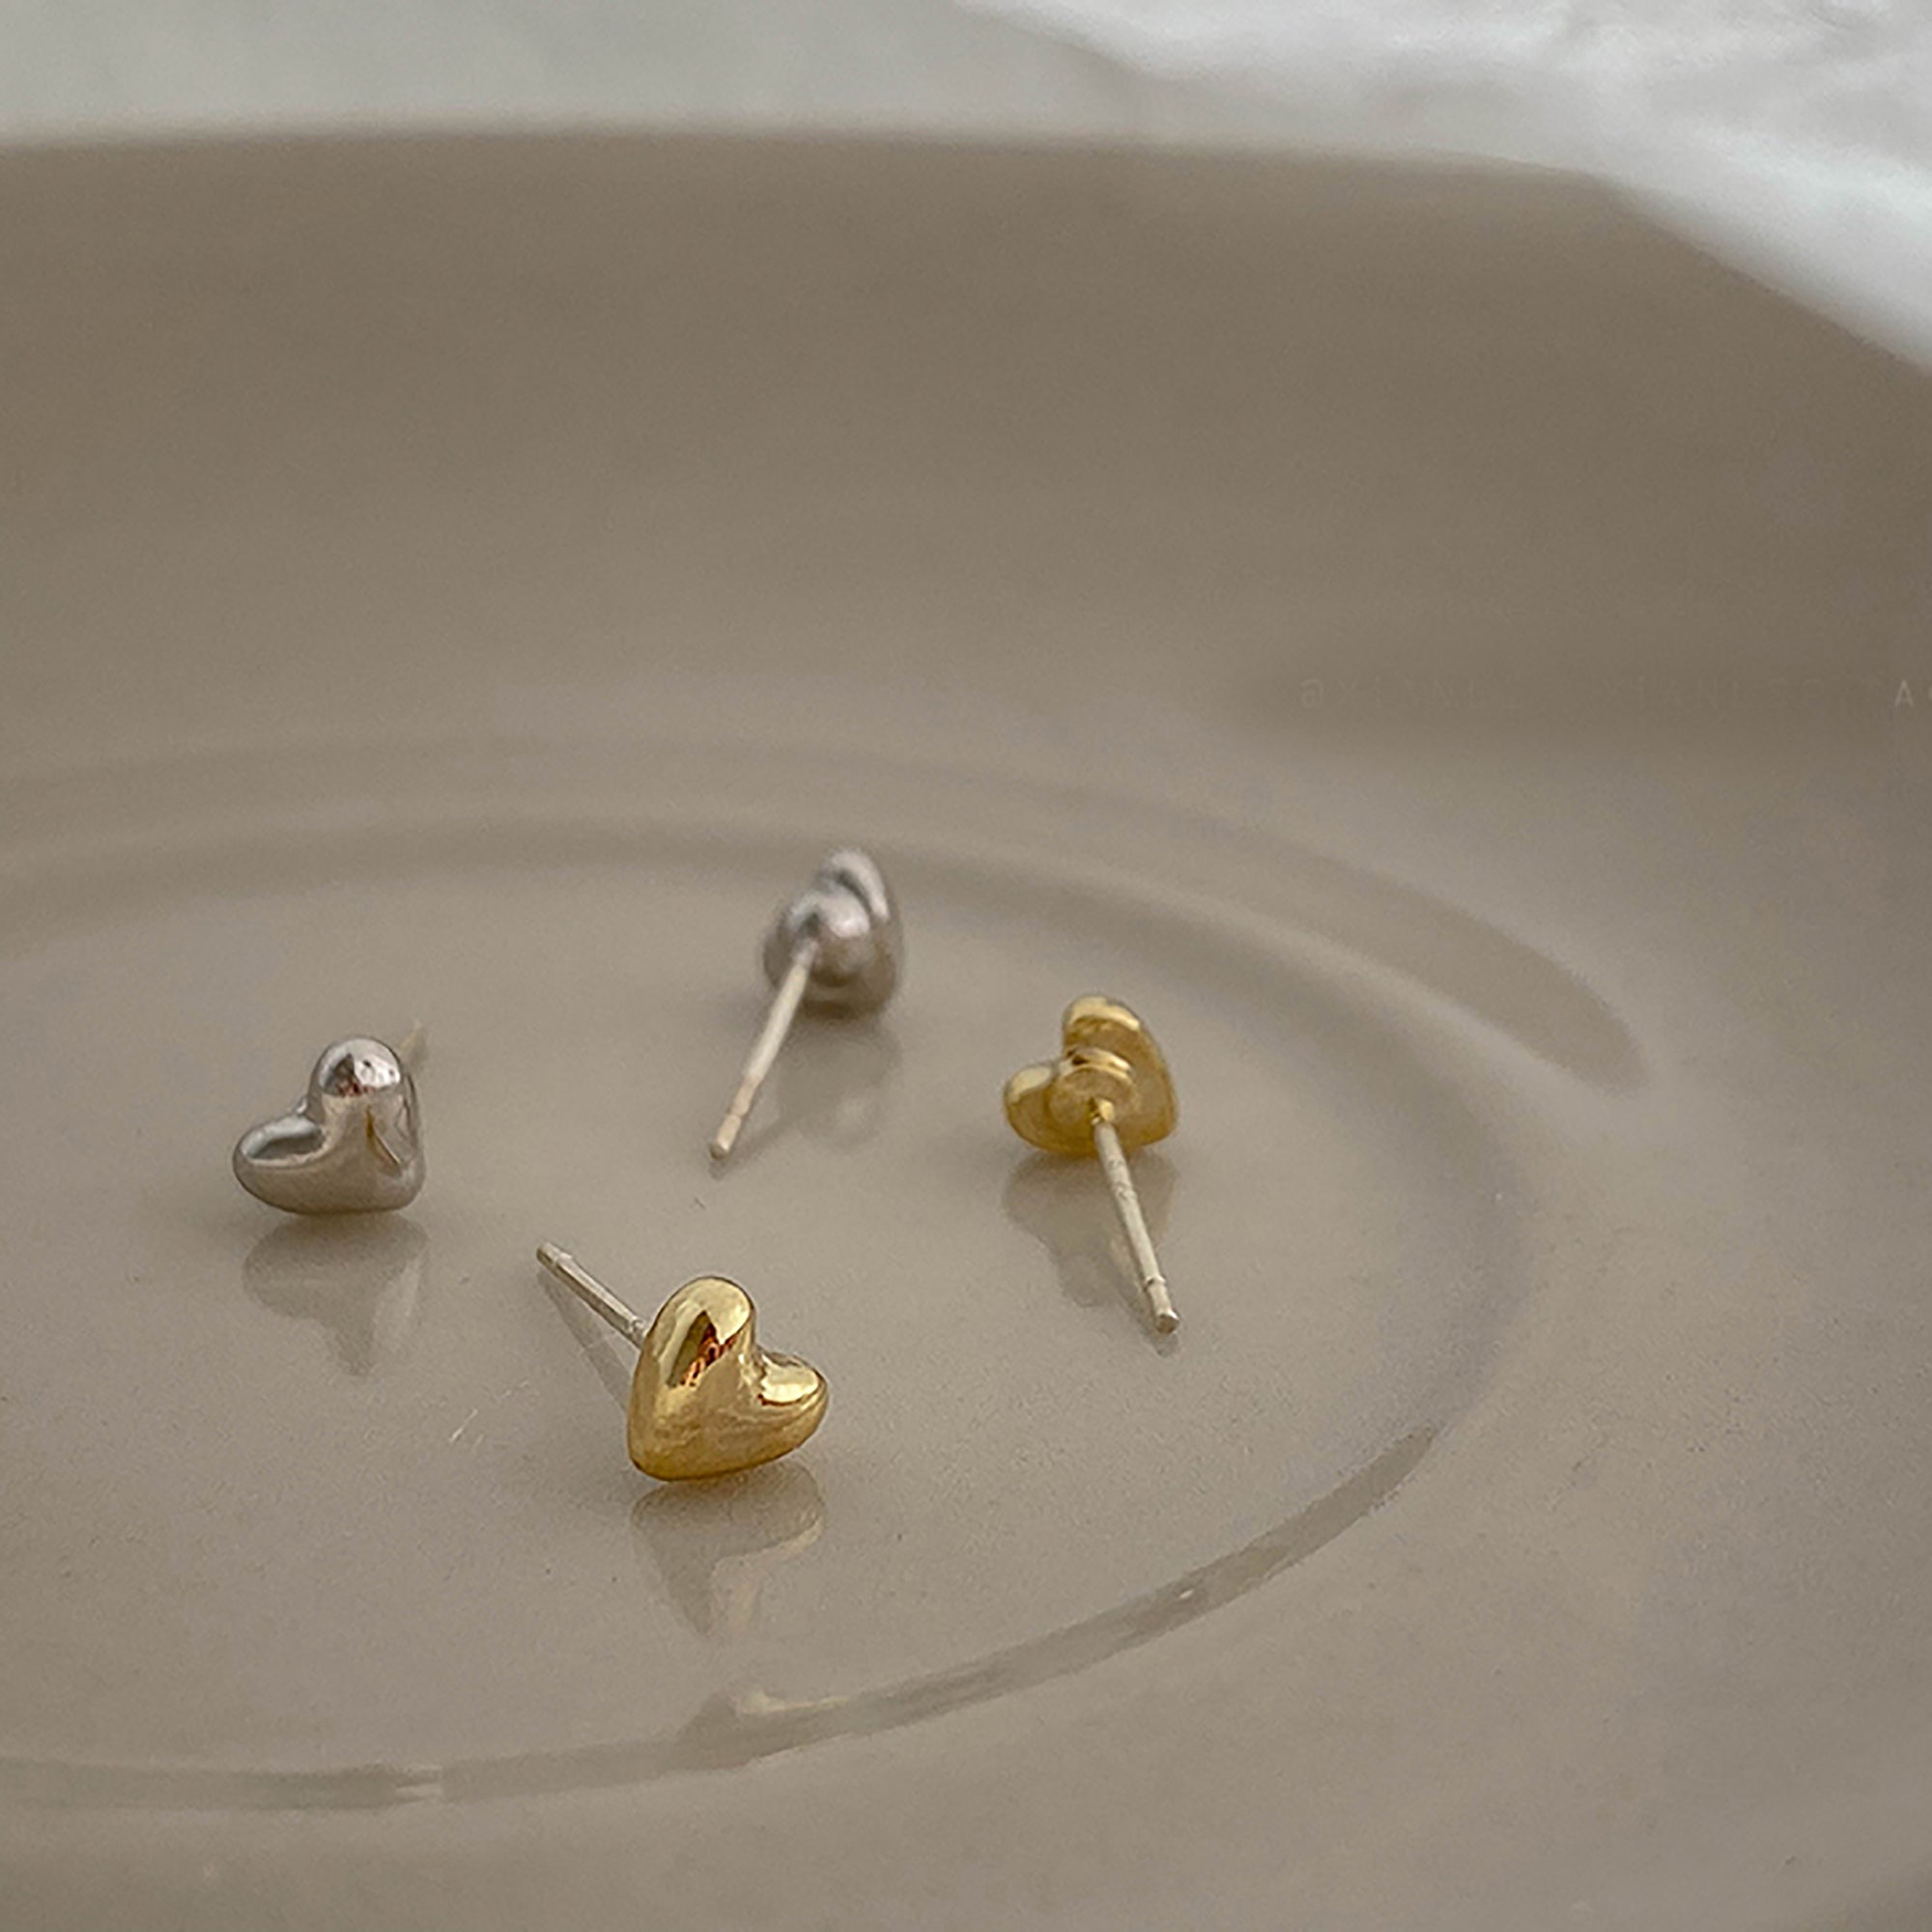 Gold Plated Mini Heart Stud Earrings Gift wedding influencer styling KOL / Youtuber / Celebrity / Fashion Icon